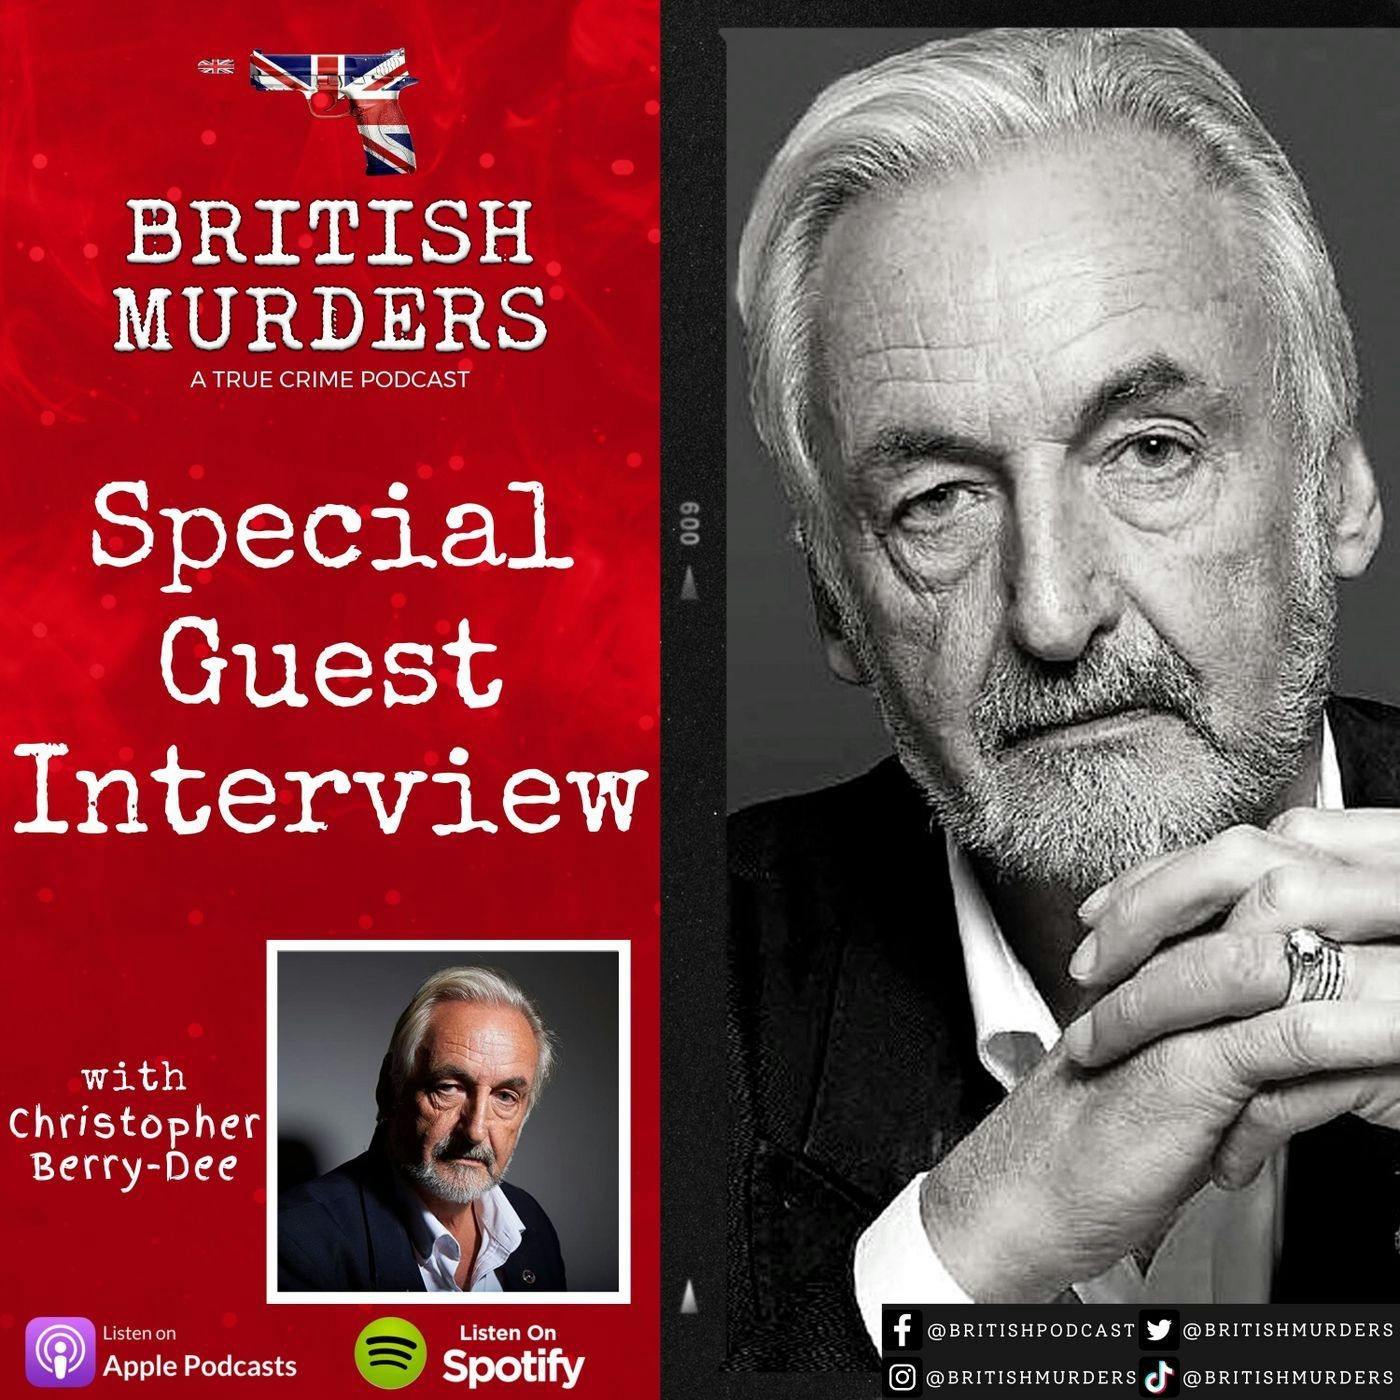 Interview #3 | Christopher Berry-Dee (Criminologist and Author)